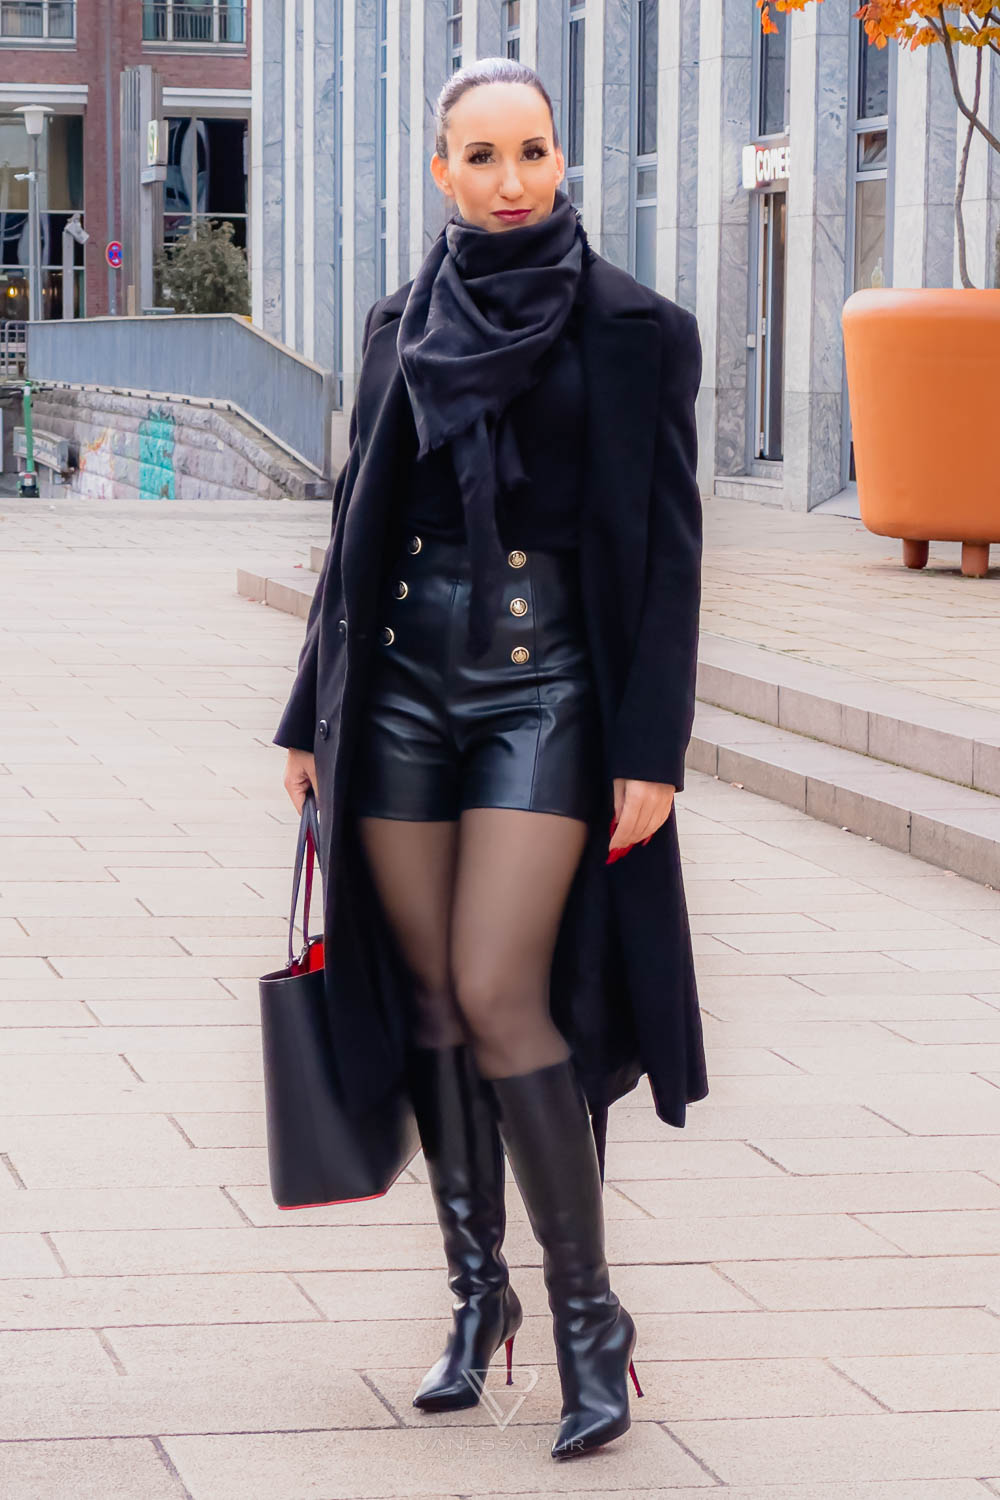 Vanessa Pur - Shopping in Hamburg - leather hotpants - nylons - How to wear boots in autumn and winter and combine them properly with latest trends. Over the knee boots, knee high boots, thigh high boots, otk